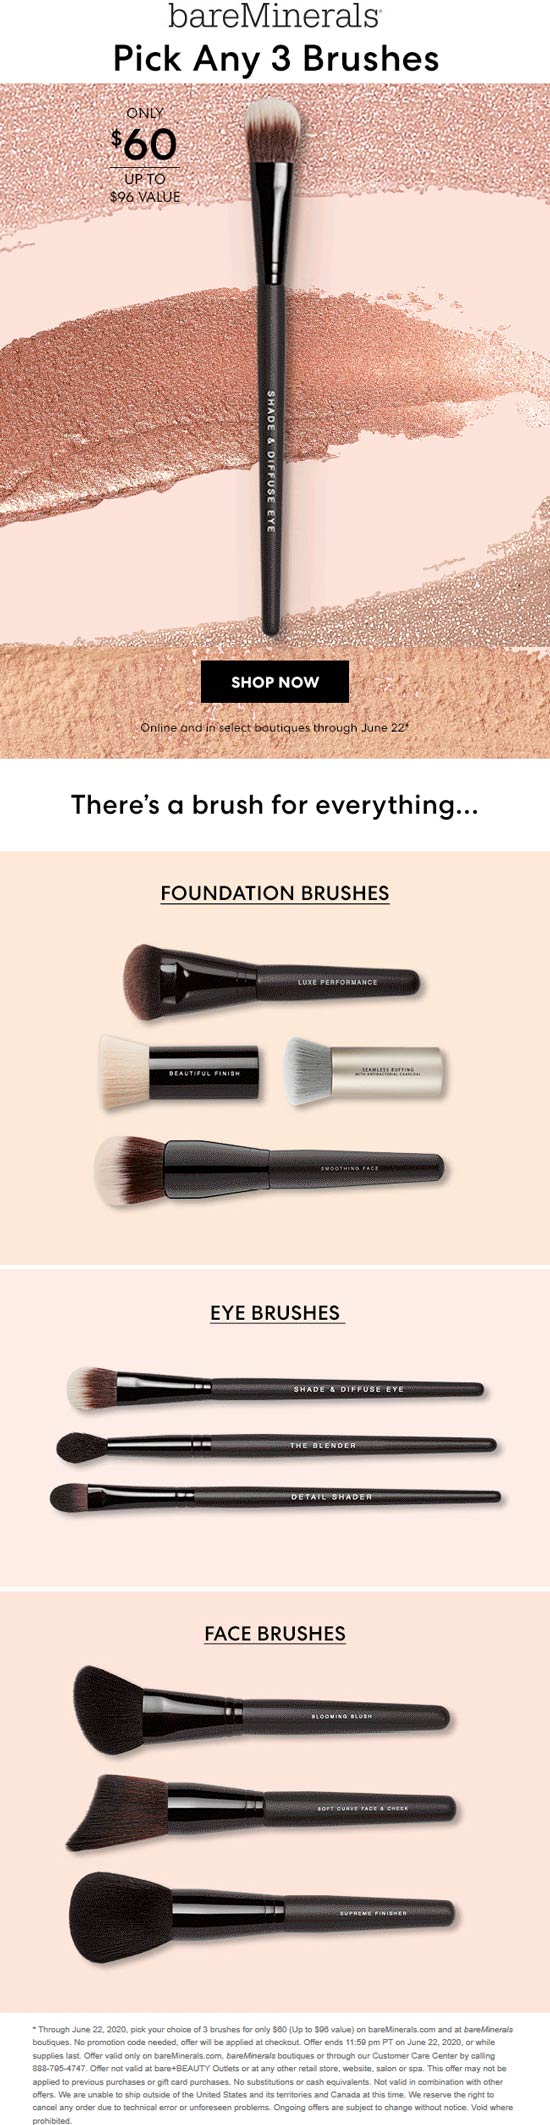 bareMinerals stores Coupon  Any 3 makeup brushes for $60 at bareMinerals, ditto online #bareminerals